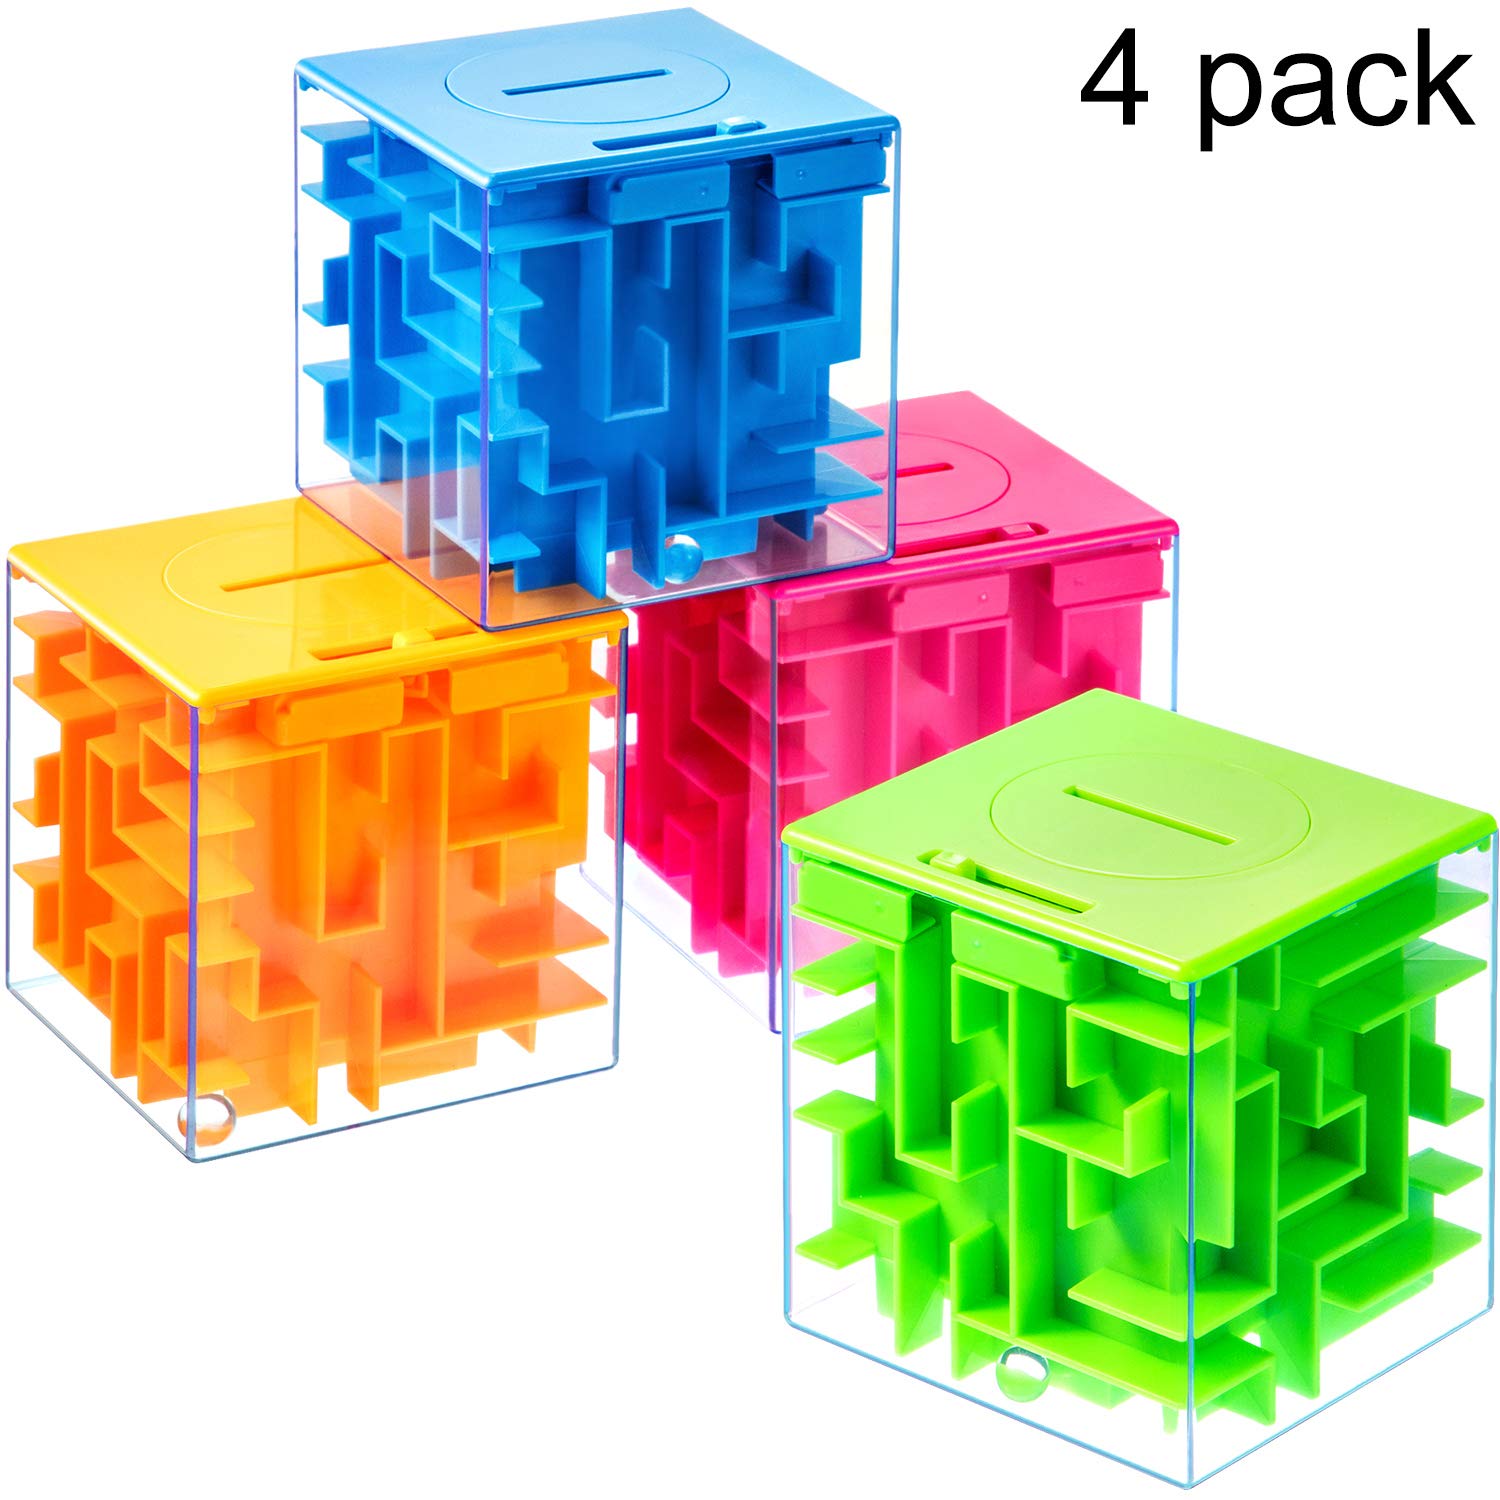 4 Pieces Money Holder Maze Puzzle Gift Box, A Fun Unique Way and Brain Teasers to People You Loved, Suits for Birthday, Valentine's (Green, Blue, Orange, Red, 7.7 cm)